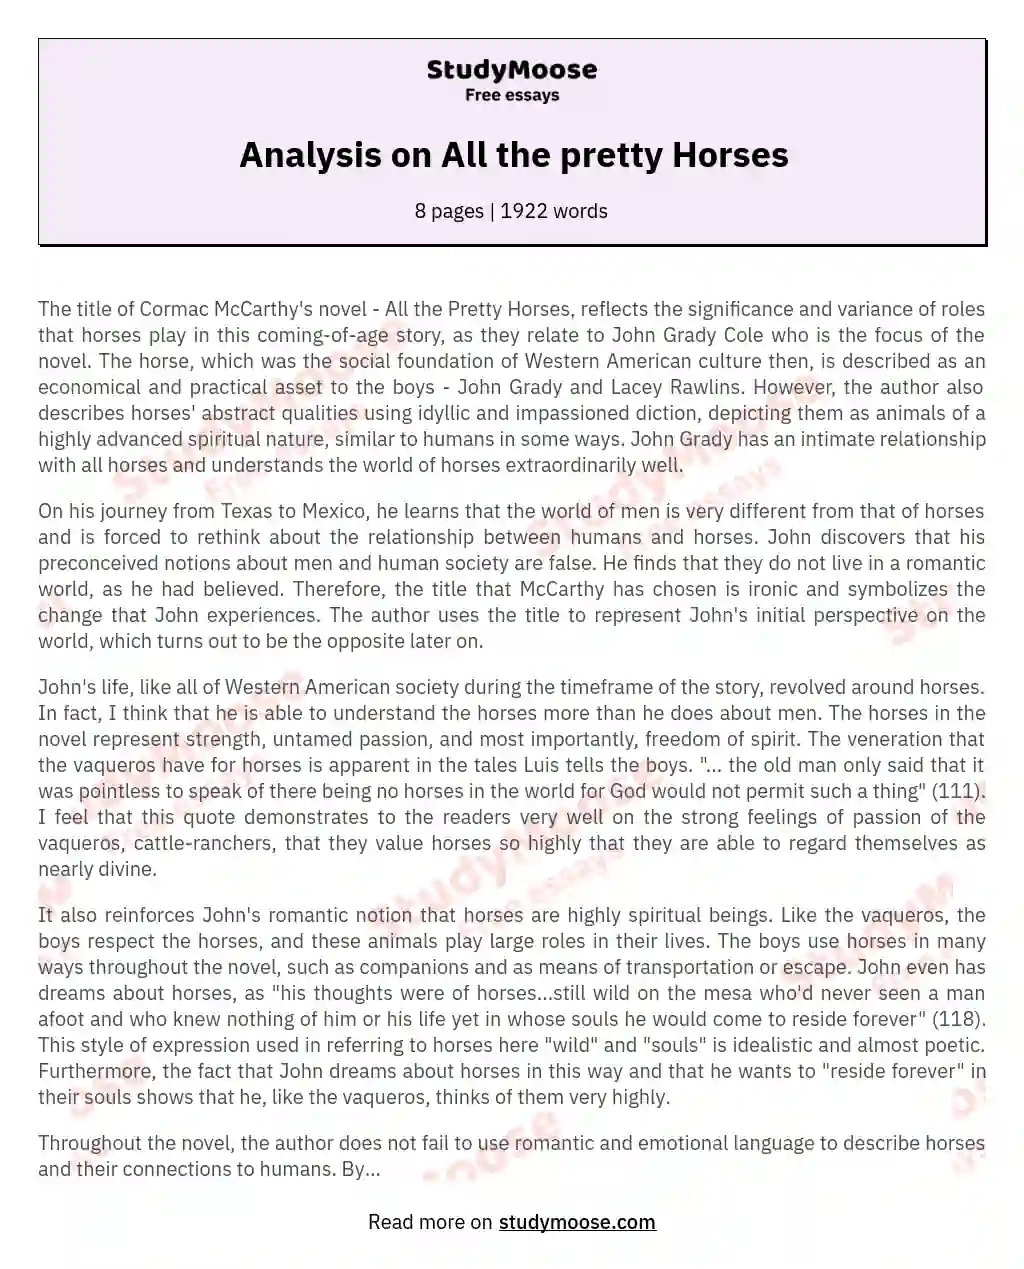 Analysis on All the pretty Horses